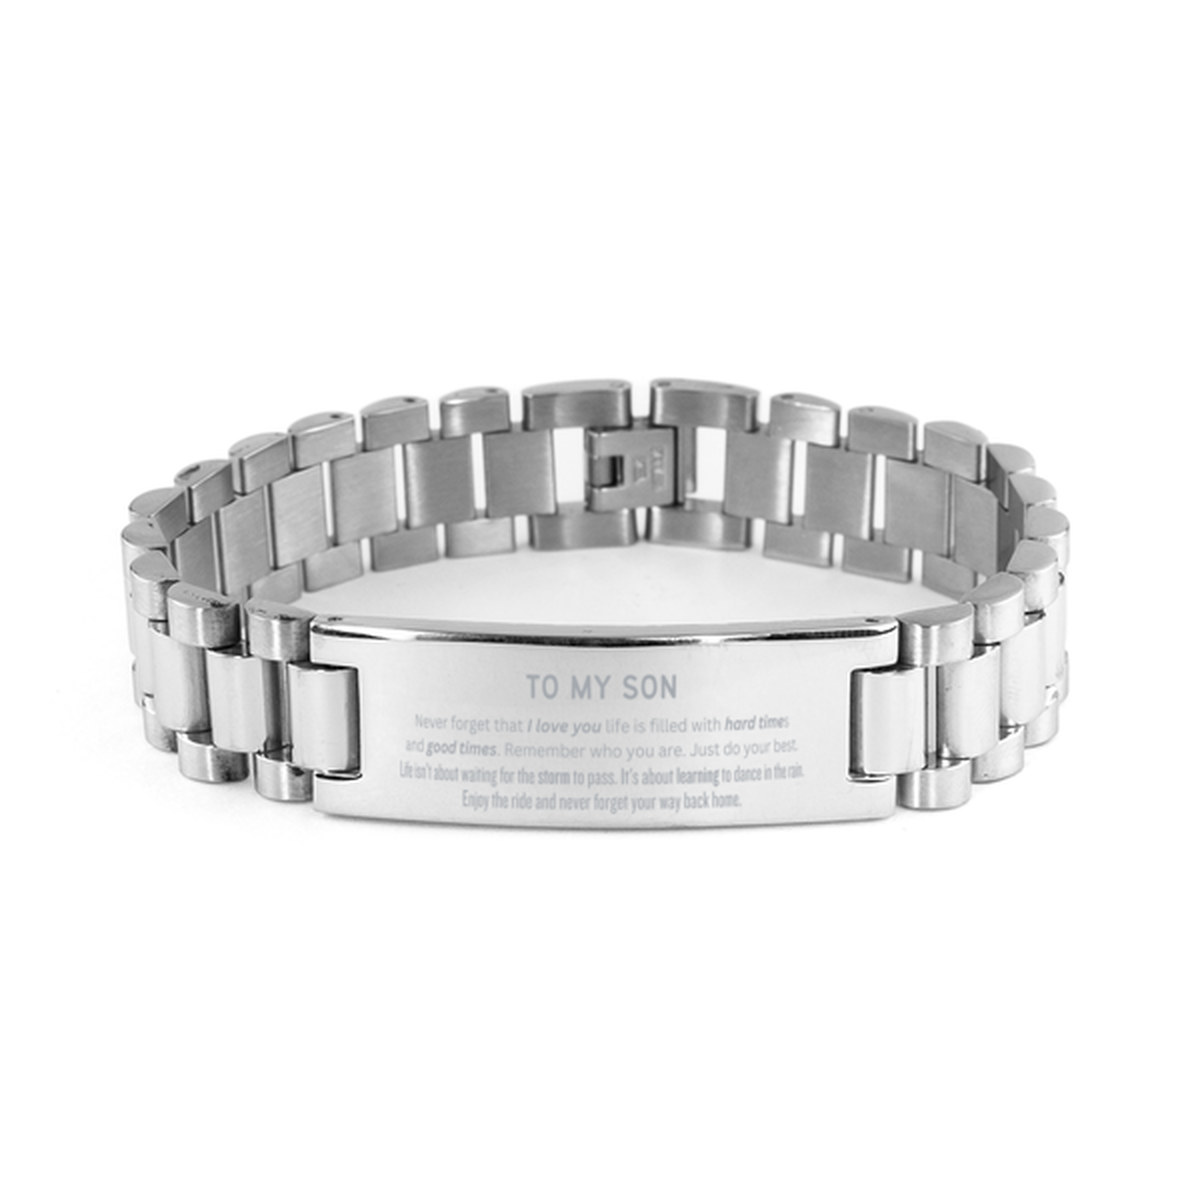 Christmas Son Ladder Stainless Steel Bracelet Gifts, To My Son Birthday Thank You Gifts For Son, Graduation Unique Gifts For Son To My Son Never forget that I love you life is filled with hard times and good times. Remember who you are. Just do your best